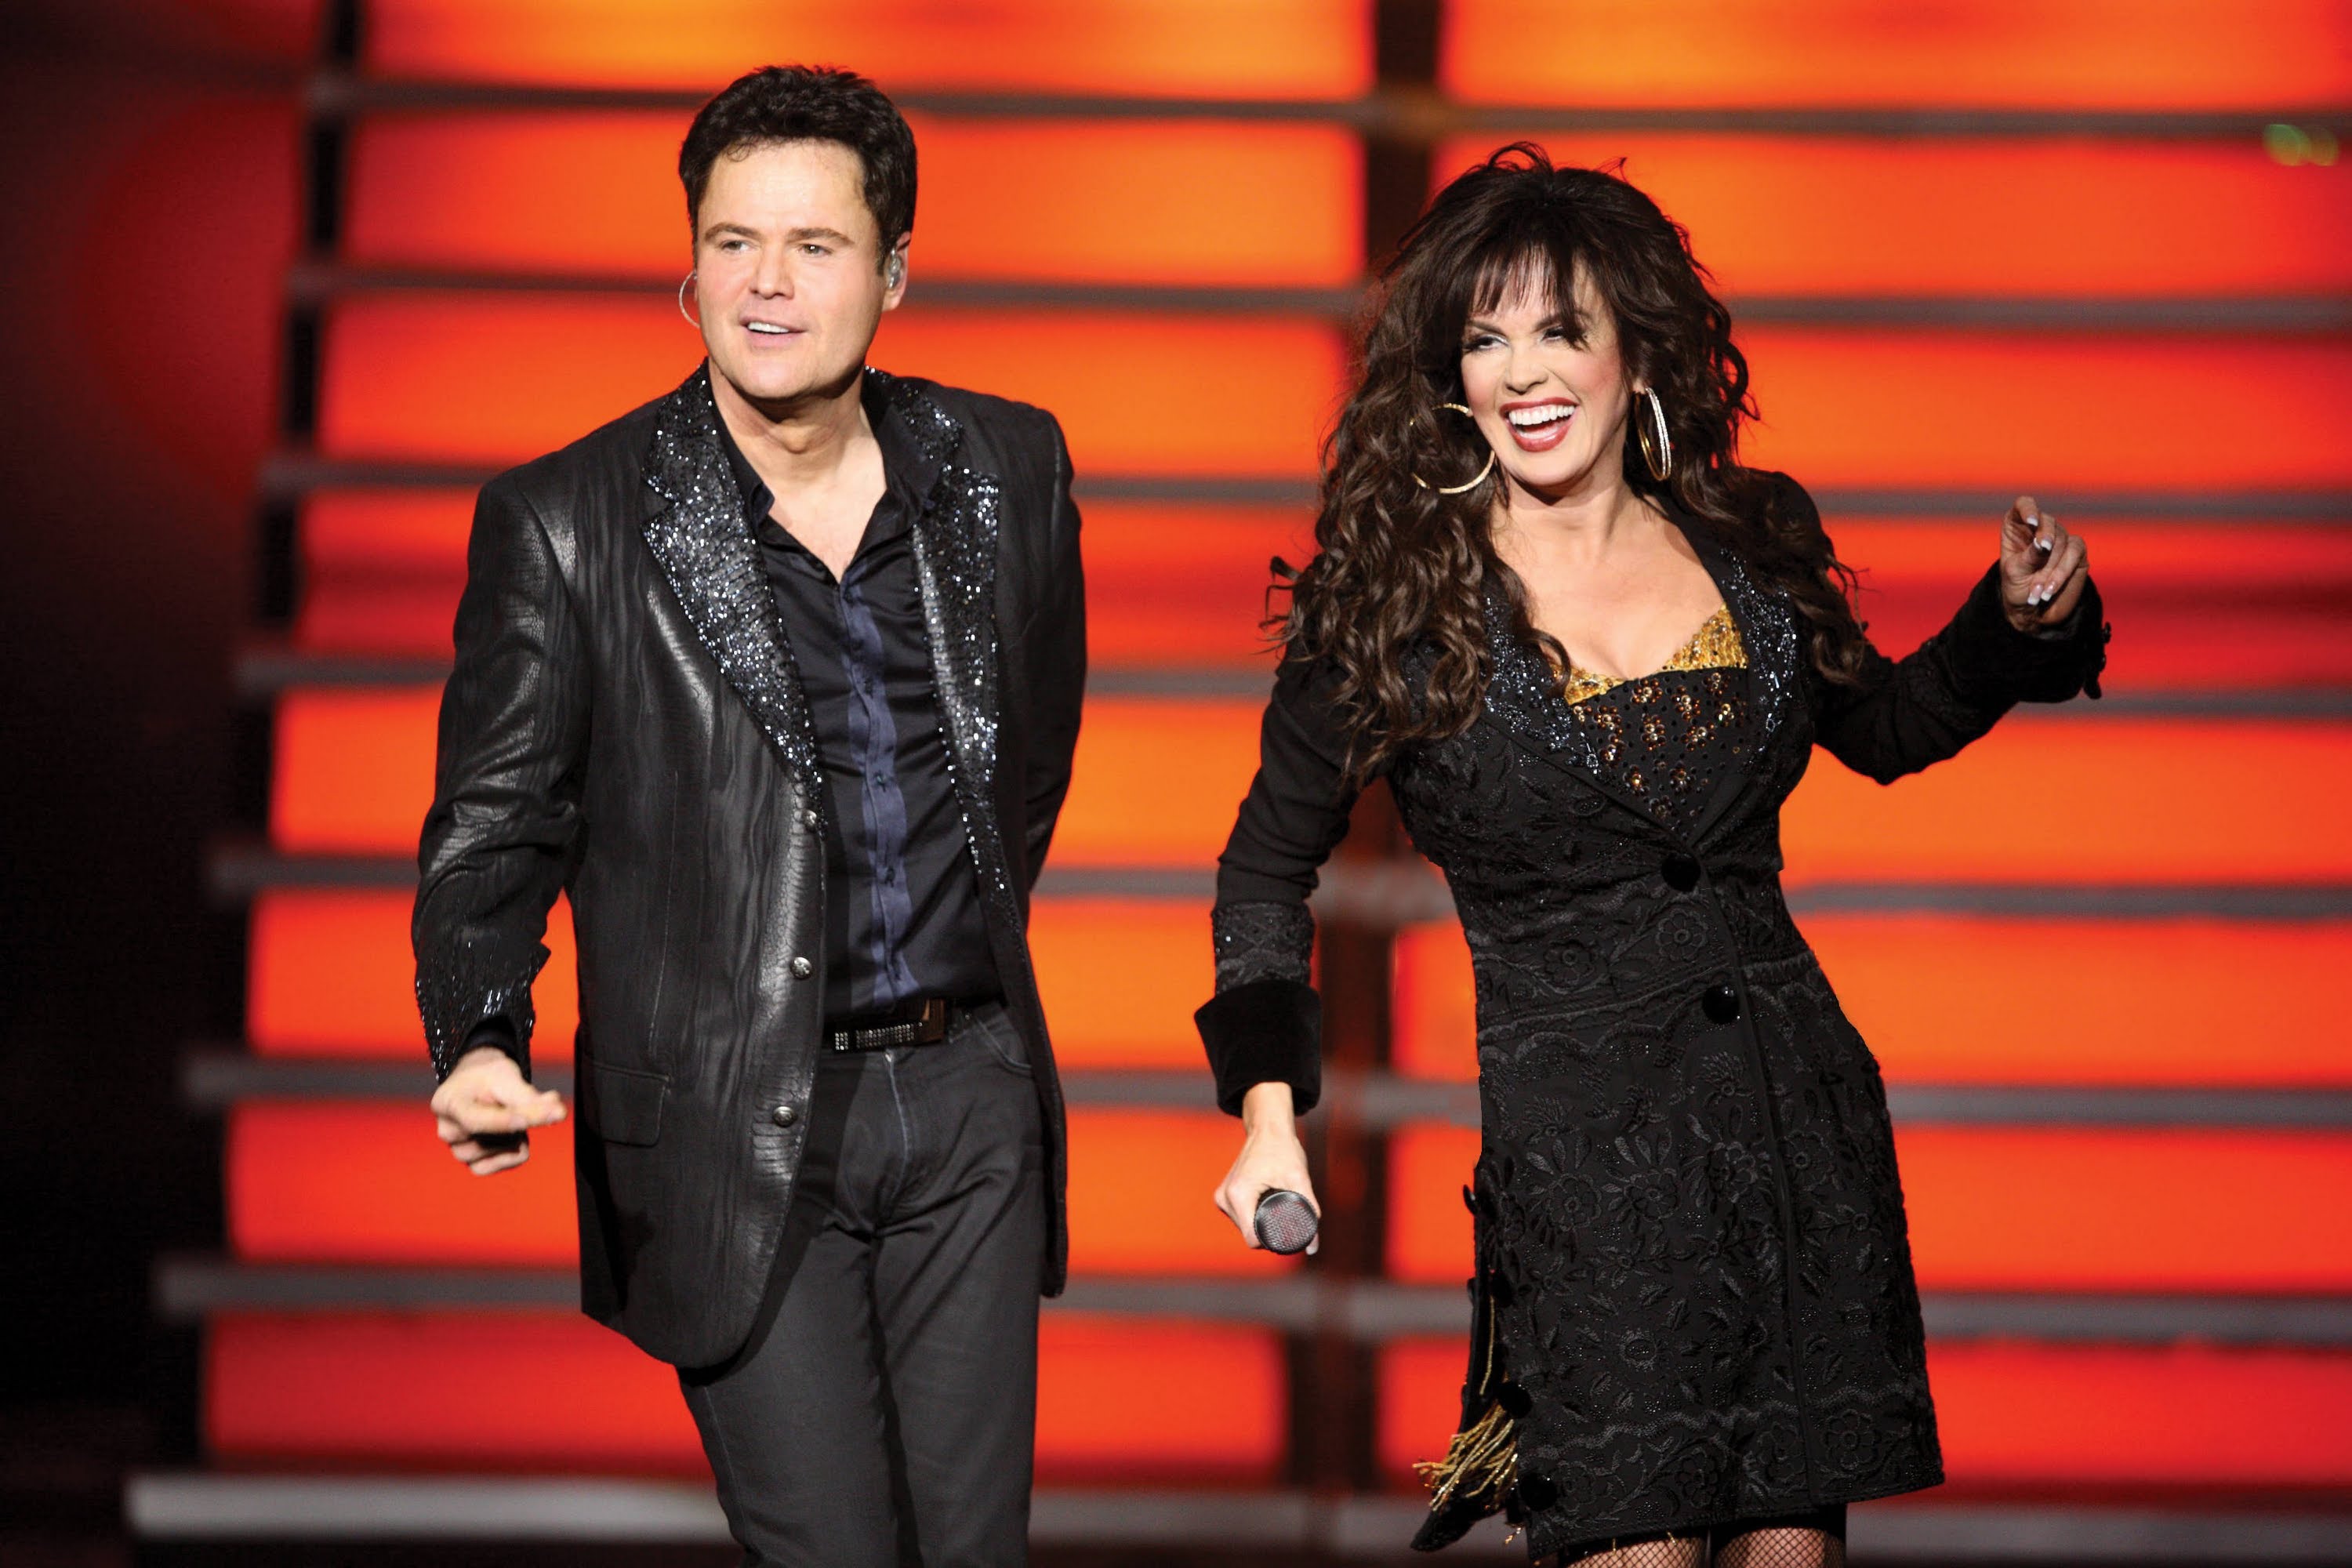 Donny & Marie 1